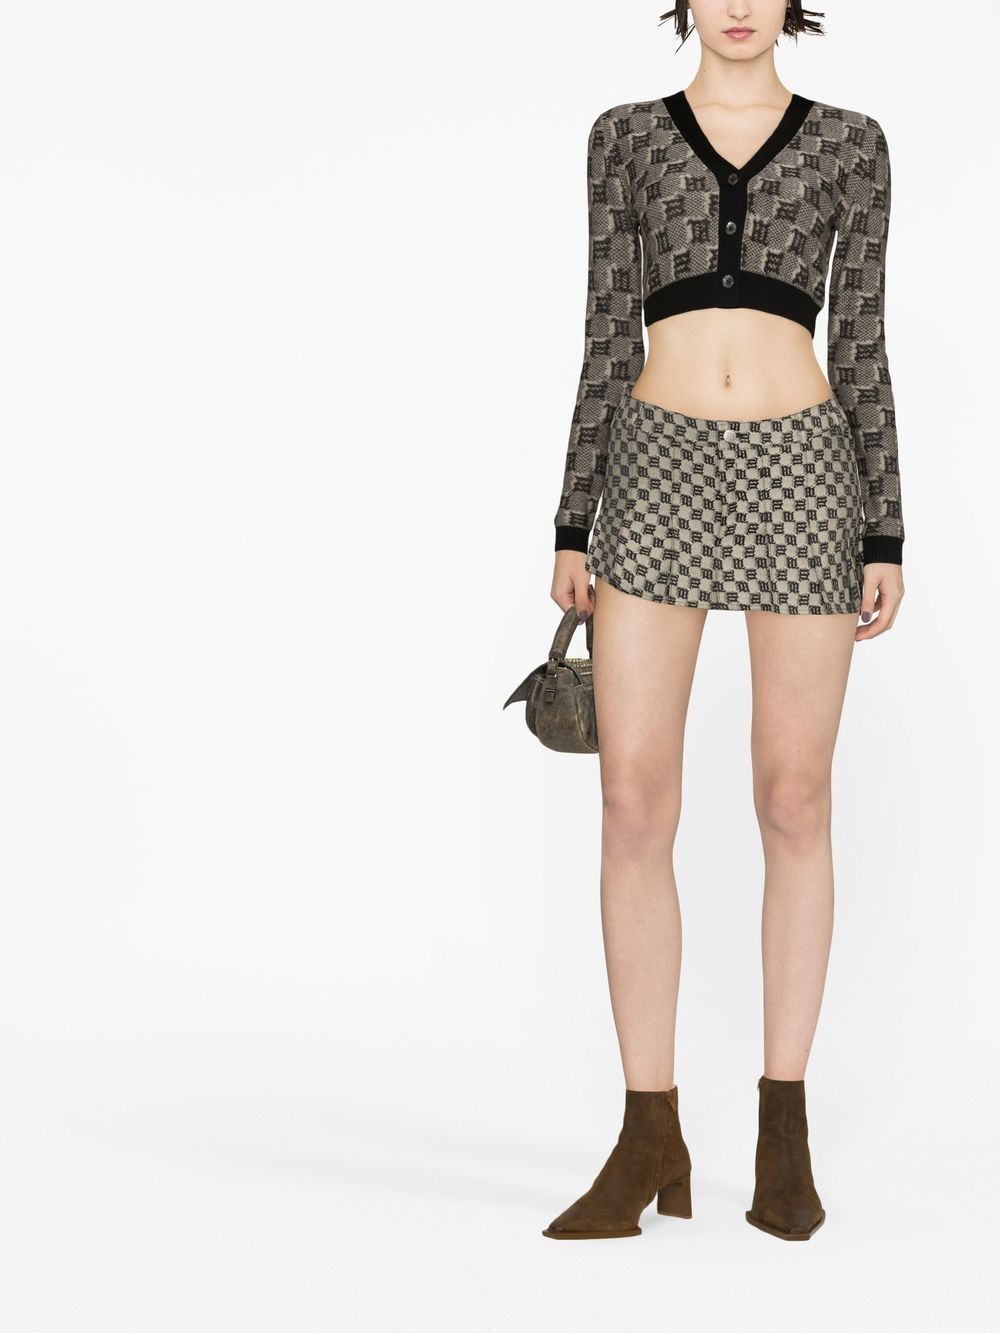 Monogram Printed Leather Mini Skirt from Louis Vuitton on 21 Buttons